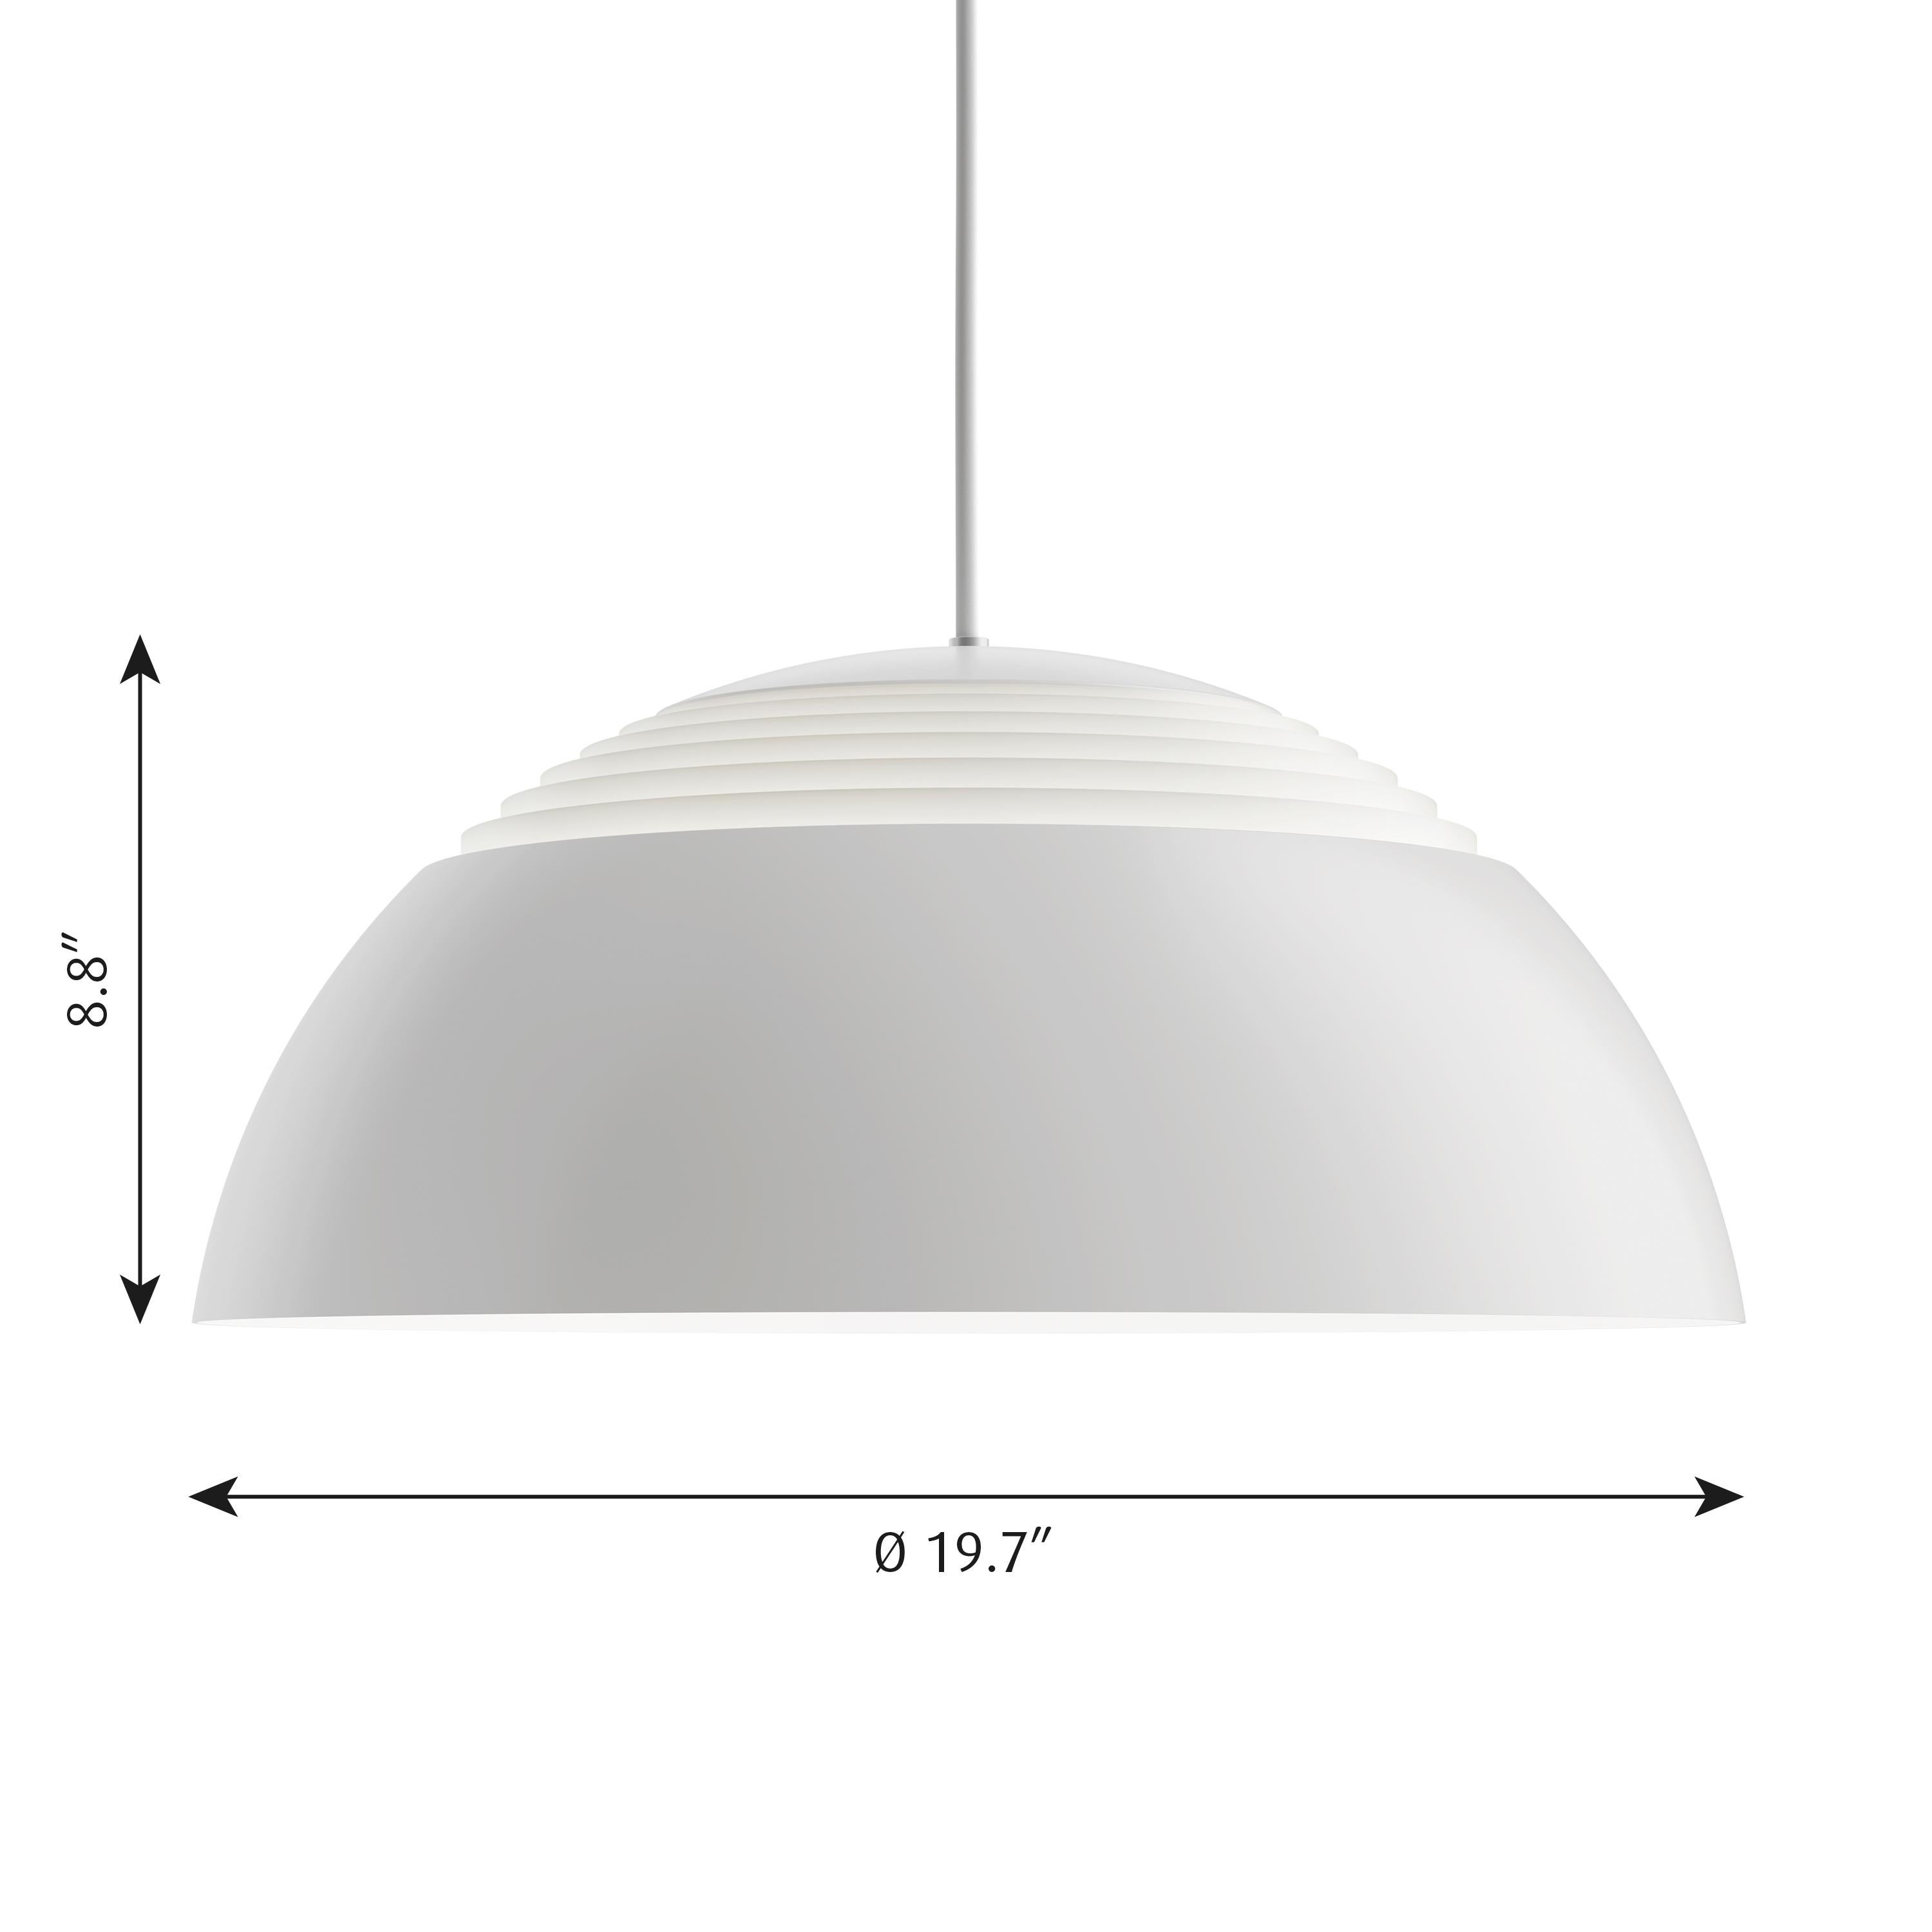 Large AJ Royal pendant in white by Arne Jacobsen for Louis Poulsen. Designed in 1960 by Arne Jacobsen for the SAS Royal Hotel in Copenhagen, the AJ Royal is an icon that follows Jacobsen's overall geometric shape concept. The spherical dome shape is